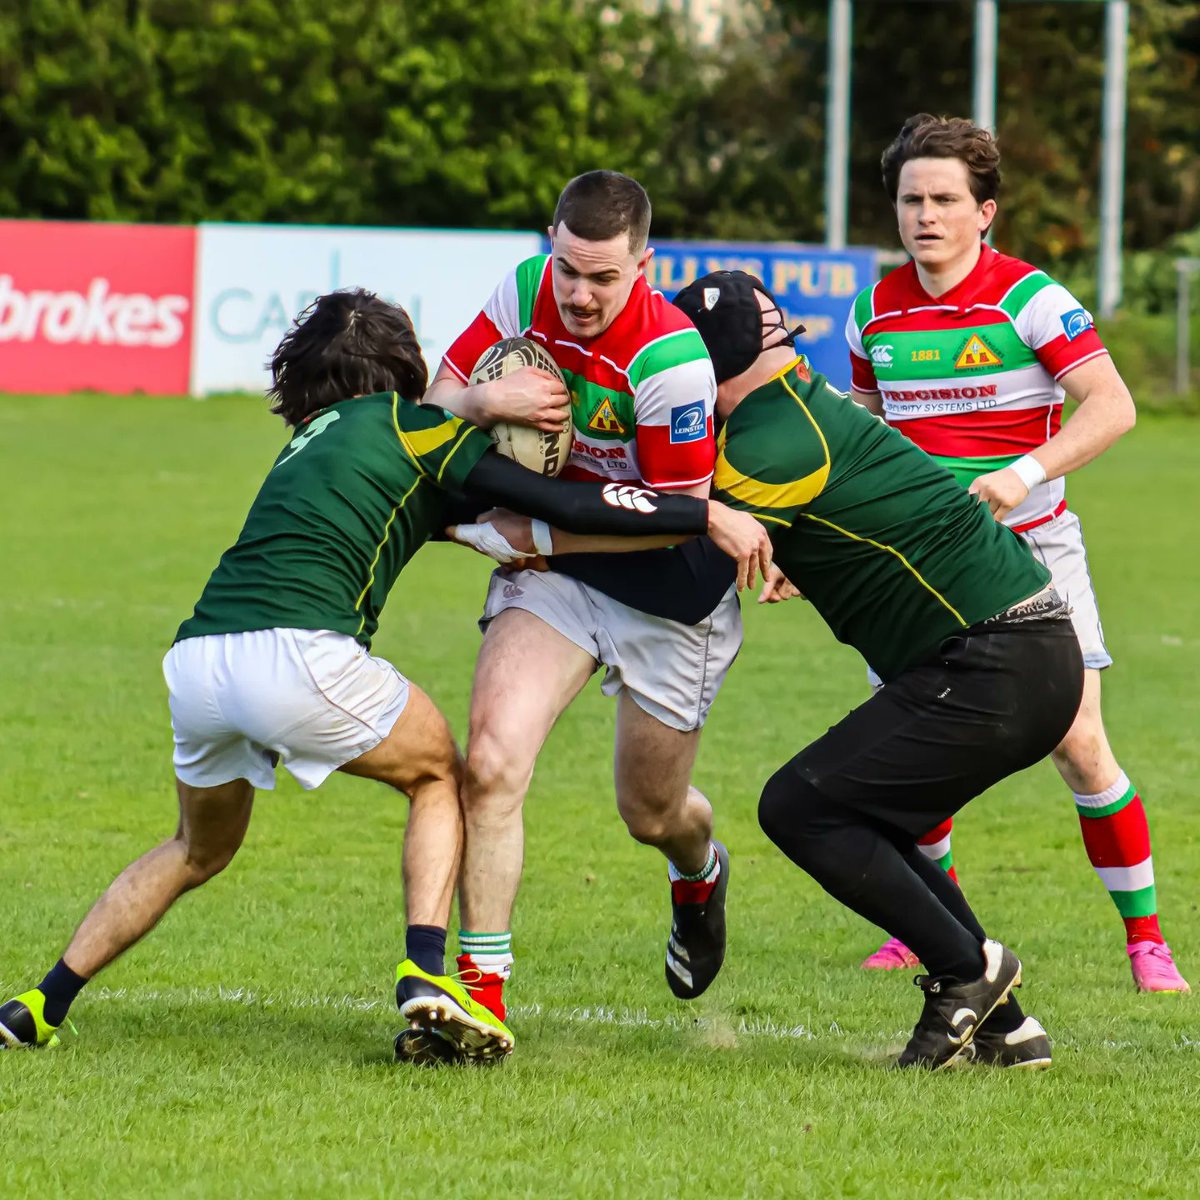 BECTIVE THROUGH TO CUP FINAL!!! Huge win for the Bective 3XV earlier today as they go into the O'Connor Cup Final. A clinical display running in five tries. FT: Railway Union 10-36 Bective 3XV #bectiverangers #rugby #rugbyunion #leinsterrugby #fromthegroundup